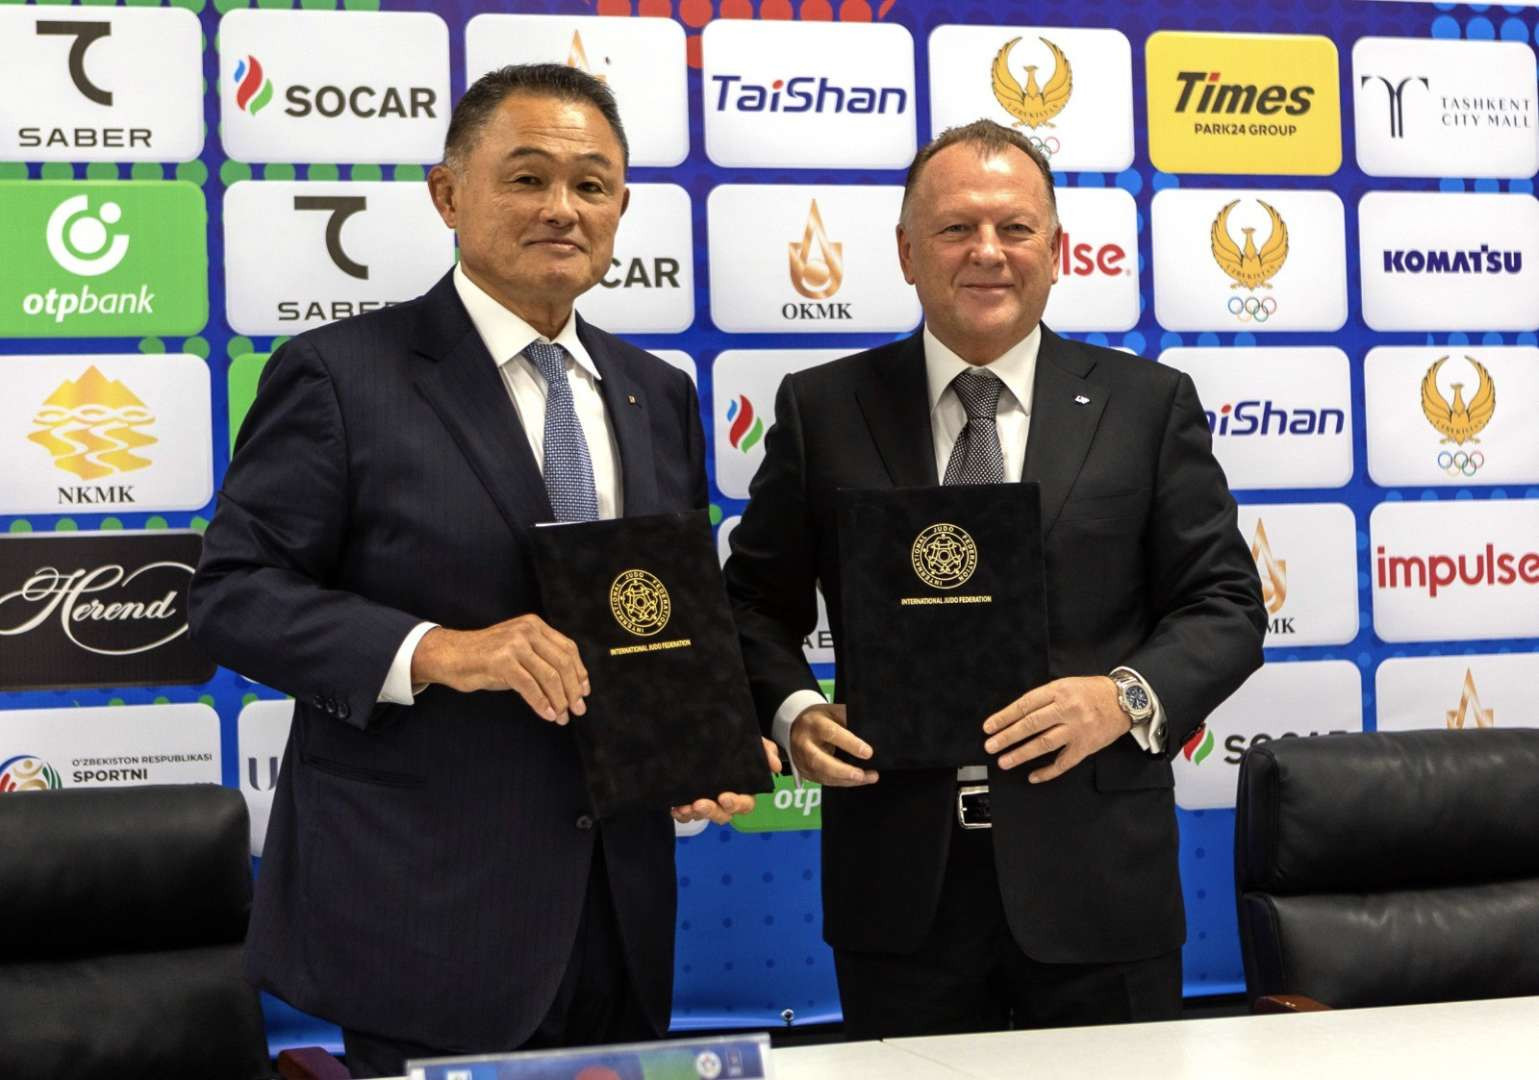 International Judo Federation President Marius Vizer, right, met with All Japan Judo Federation leader Yasuhiro Yamashita in a signing ceremony today at the Humo Arena ©IJF